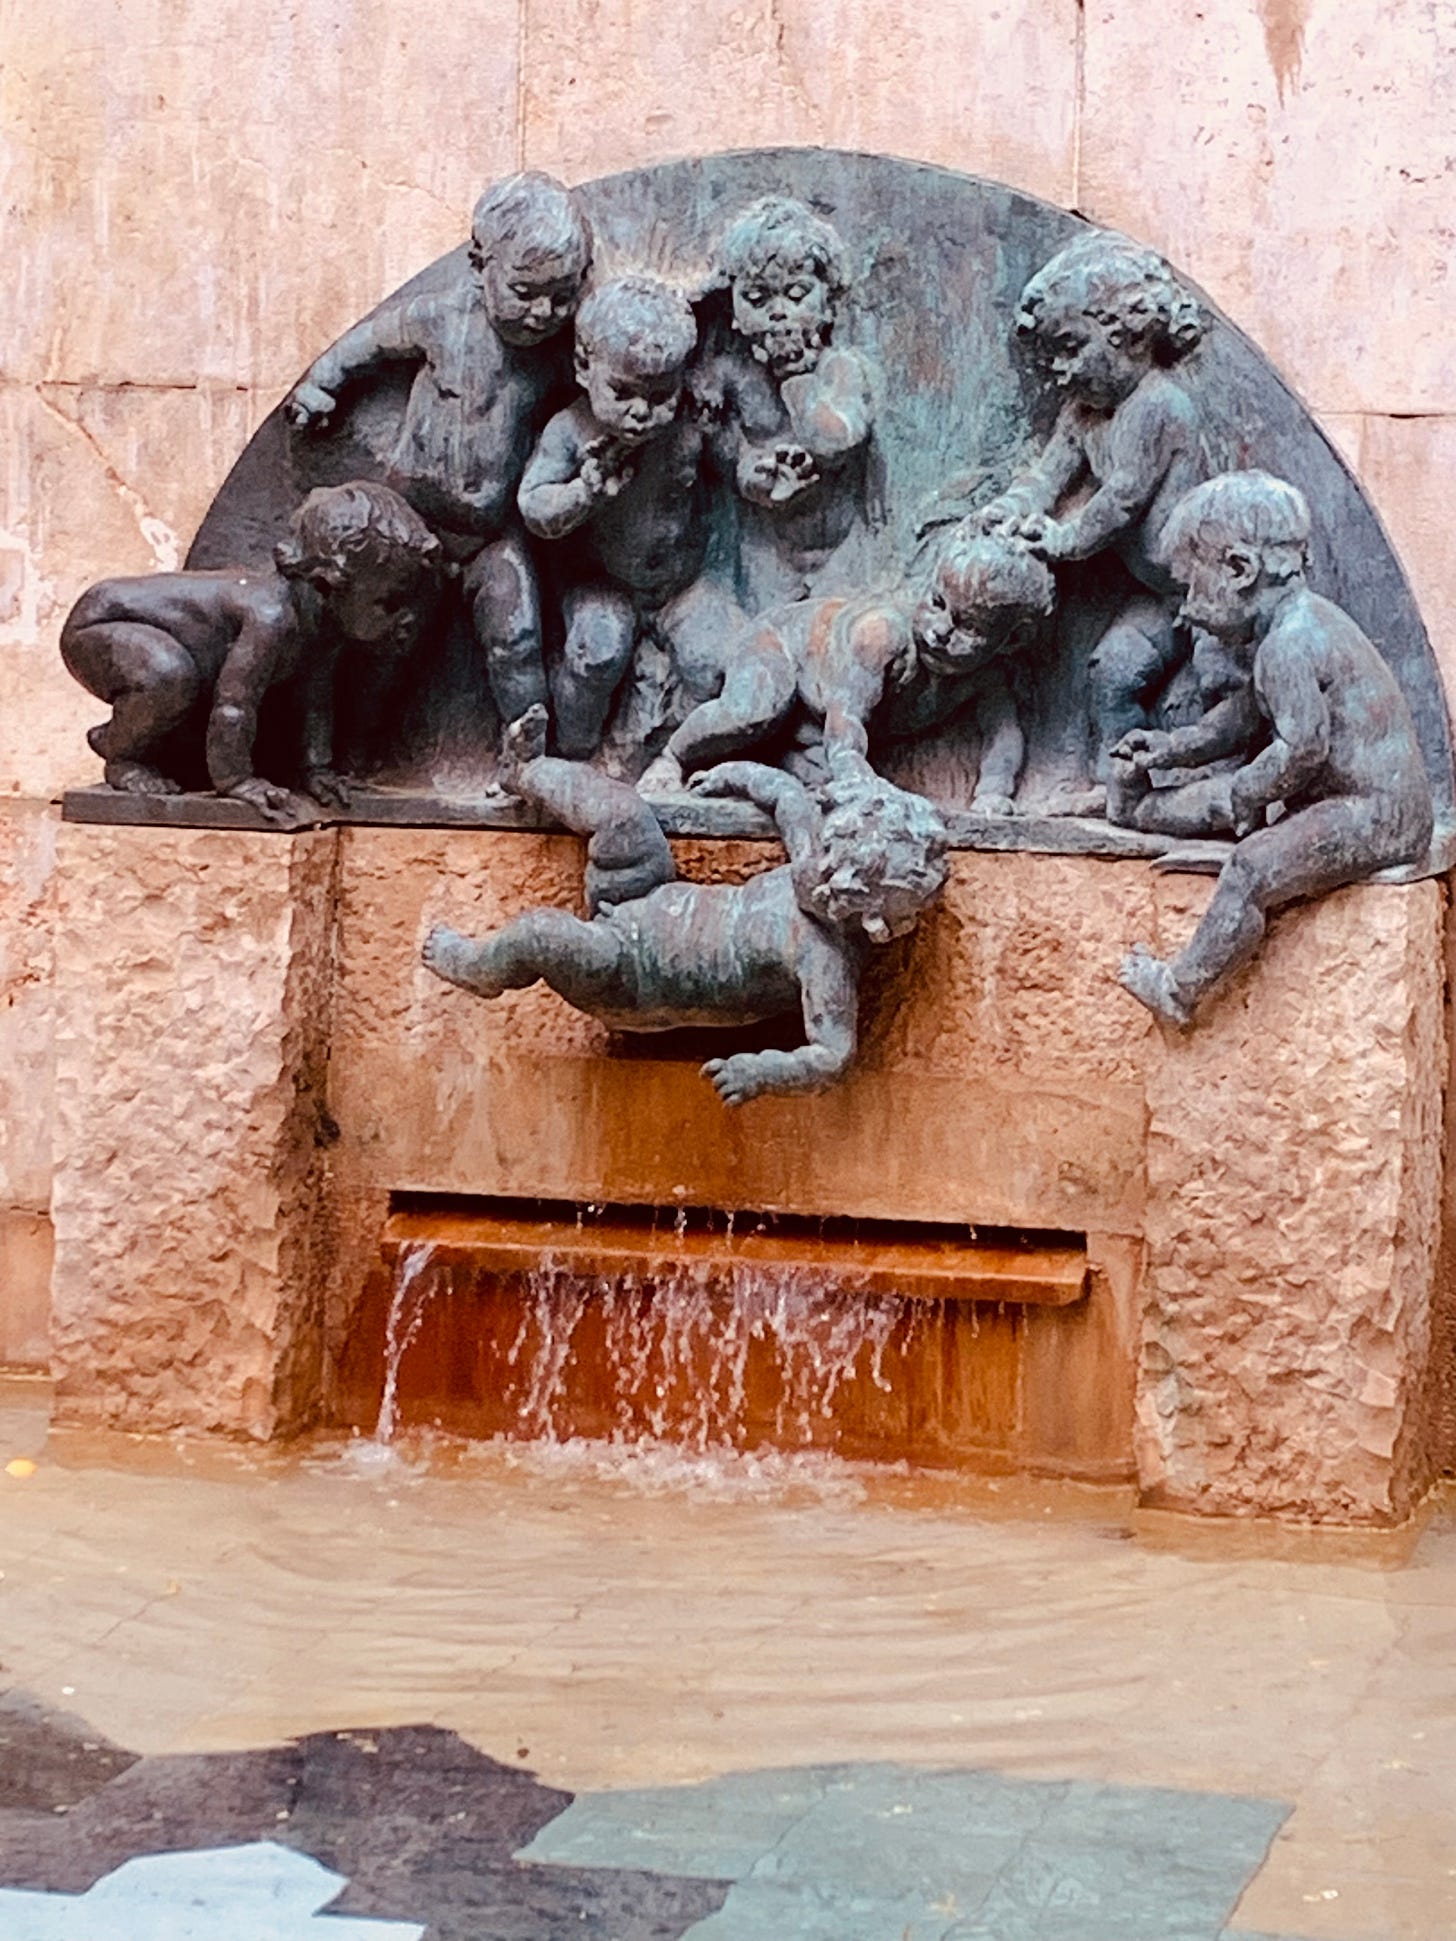 Above a fountain, a bas relief of a group of toddlers watches as one of their group falls off the ledge to the pool below.